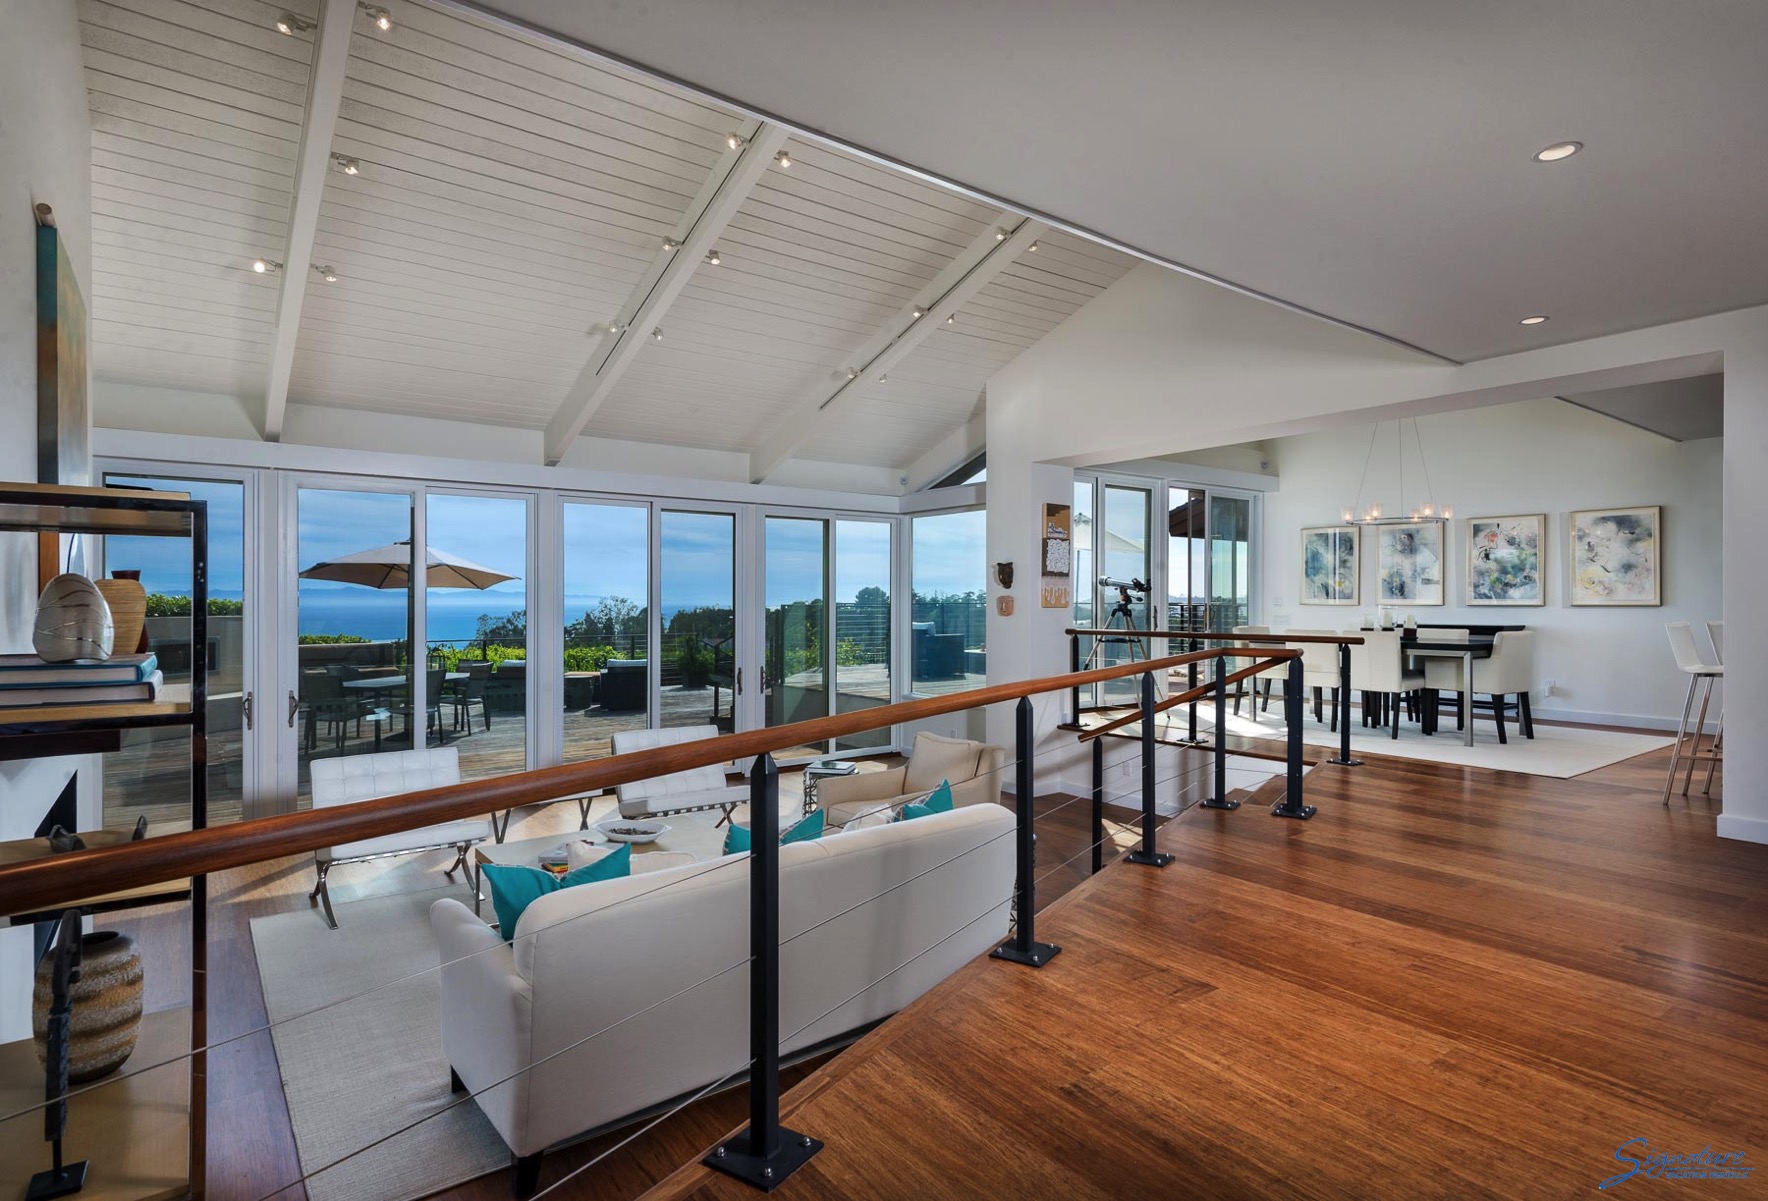 The living room is light and bright with large plate glass windows framing the ocean views.